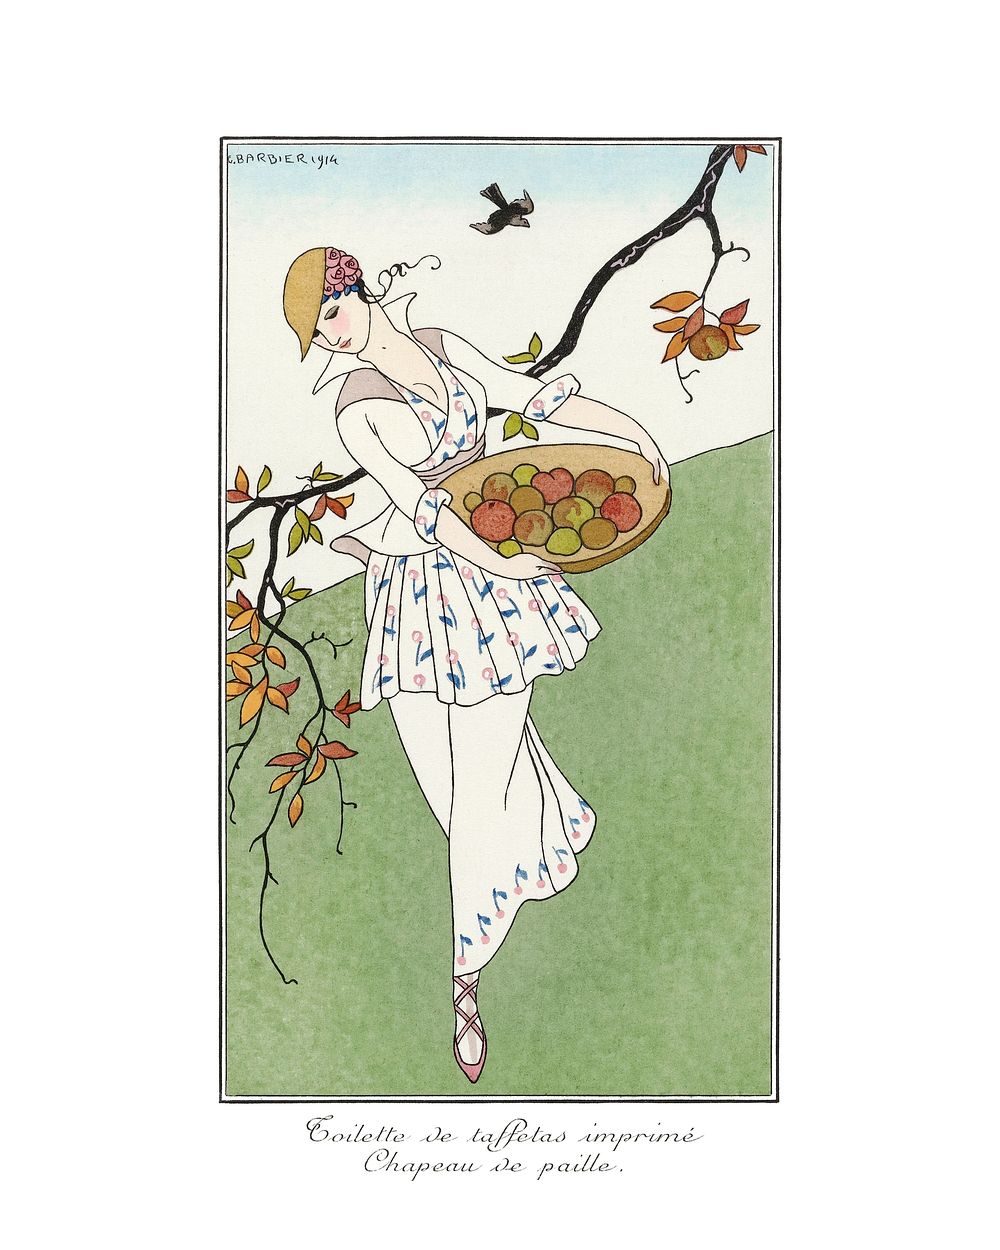 Woman vintage art poster, art deco fashion illustration remix from the artwork of George Barbier